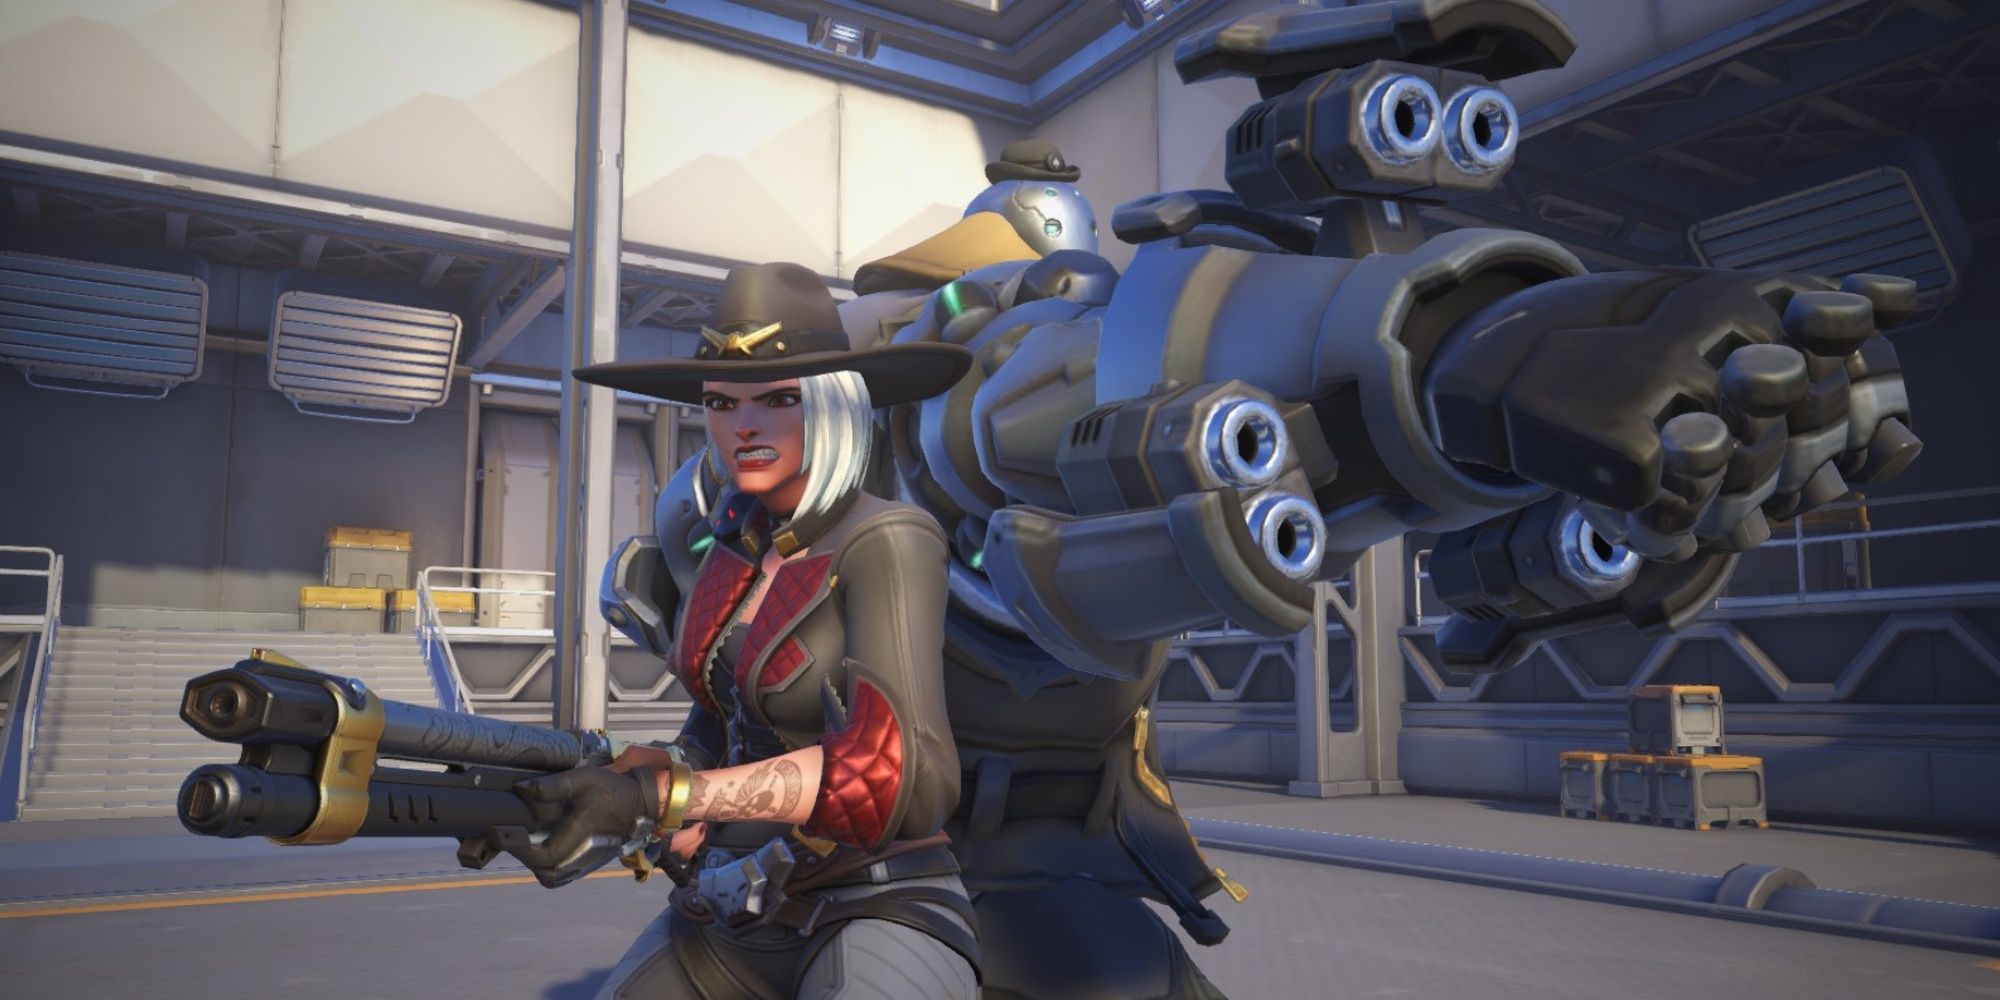 Ashe and Bob from Overwatch two are posed back-to-back with weapons raised.